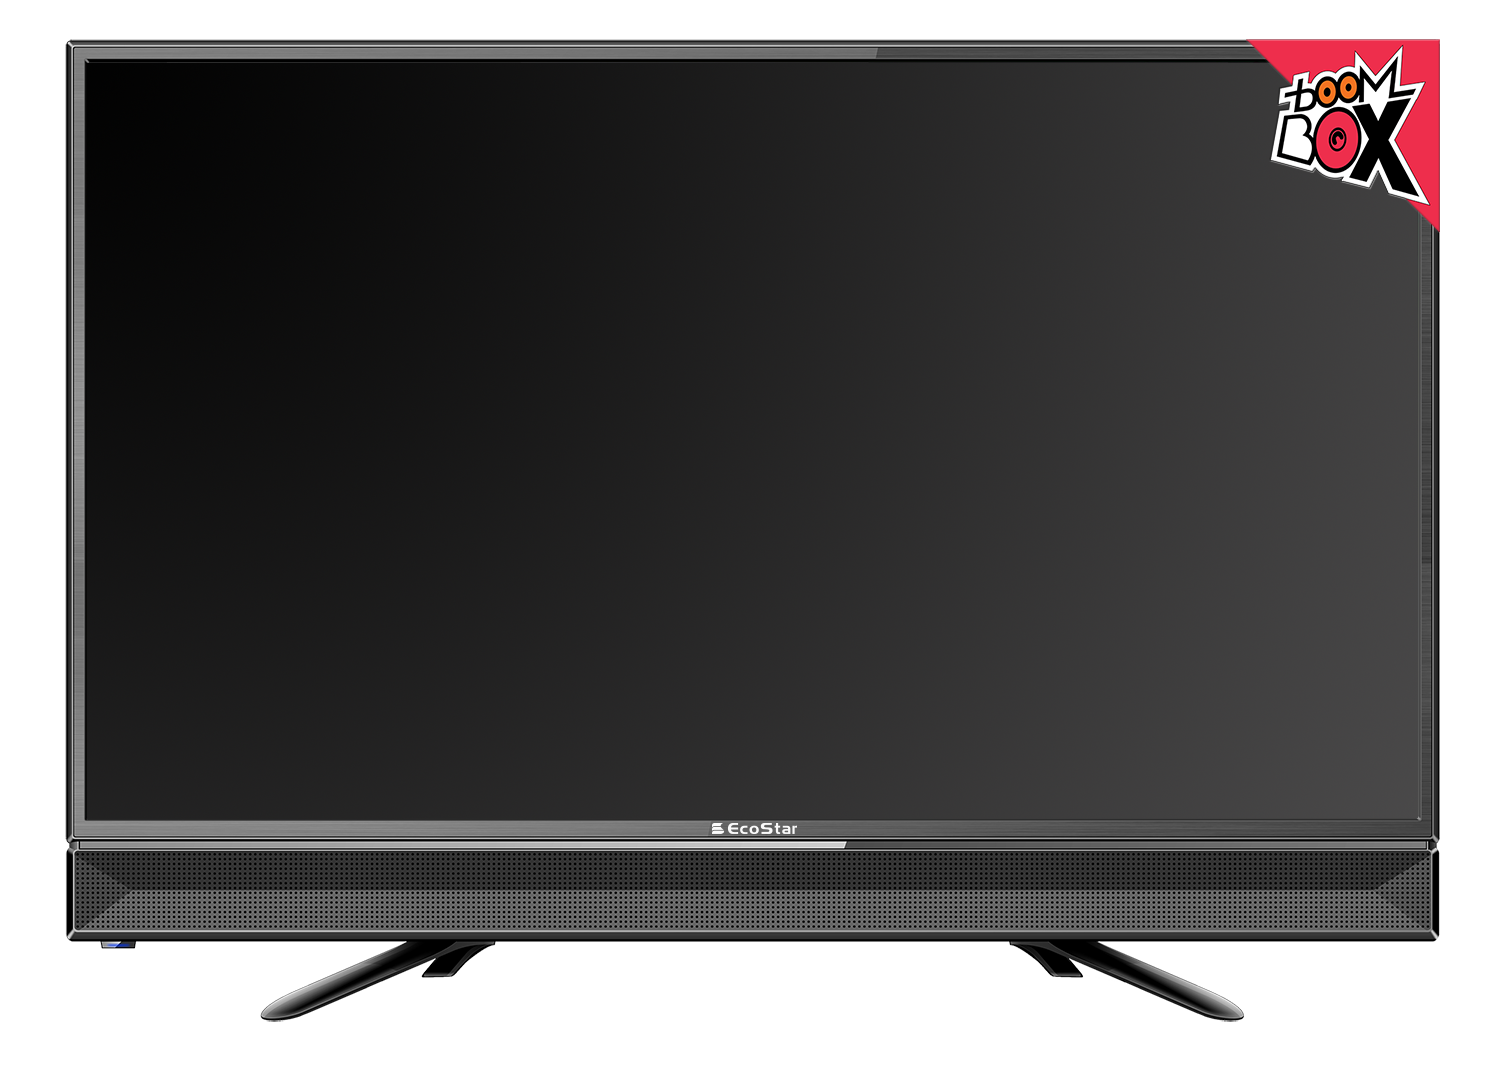 EcoStar launches smartest 32 inches LED TV